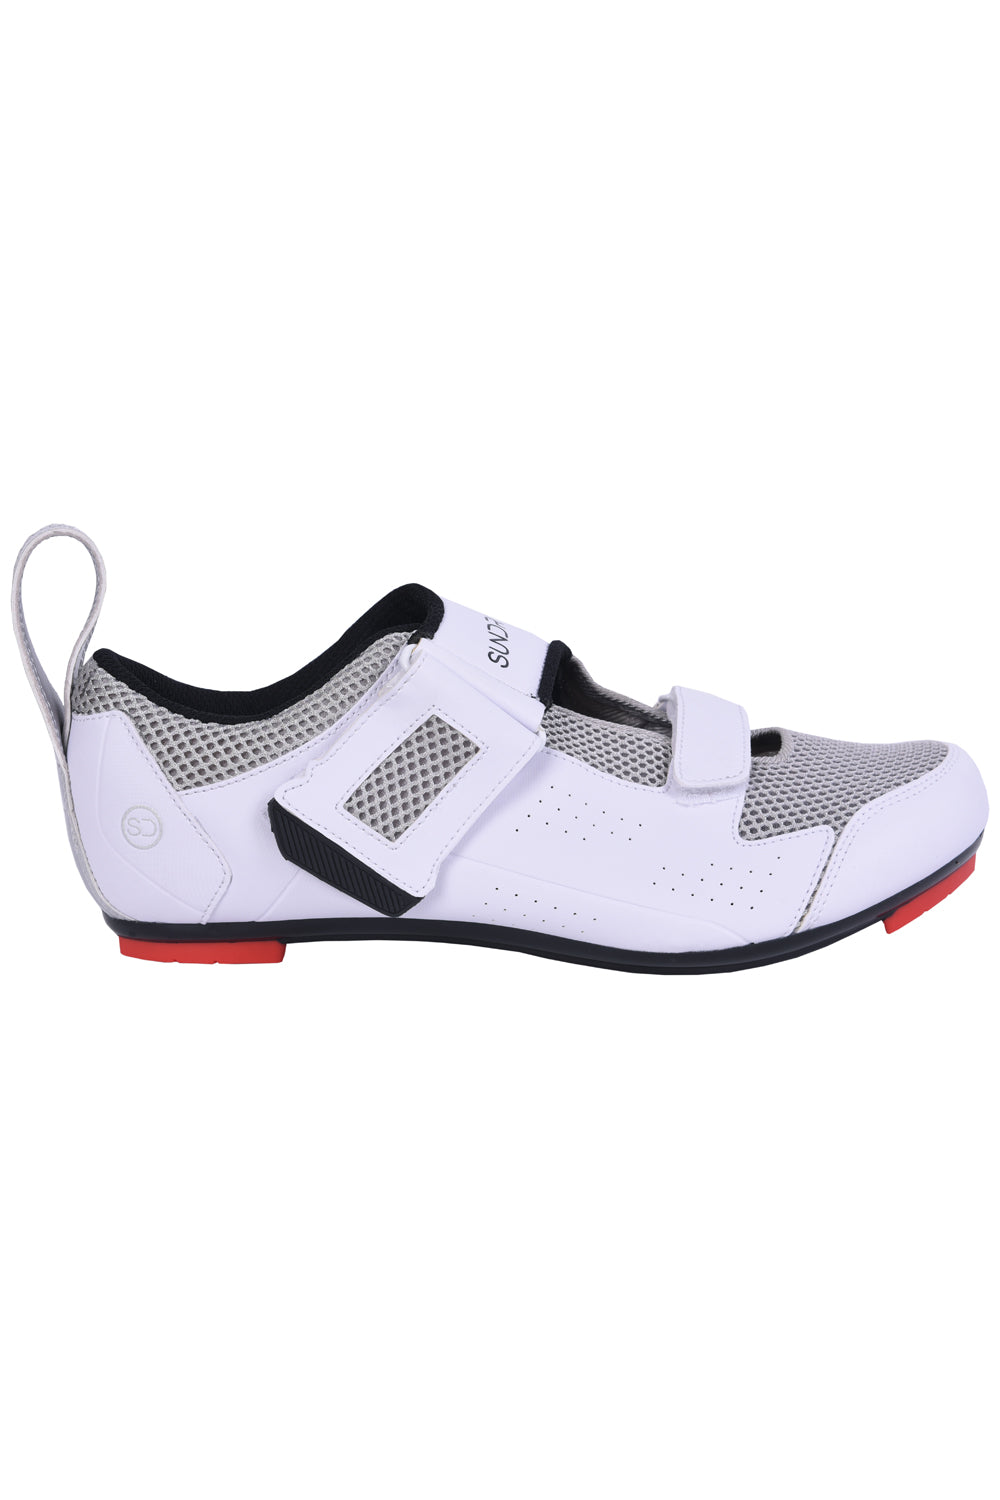 Sundried S-GT5 Triathlon Cycle Shoes Cycle Shoes 41 White SD0369 41 White Activewear